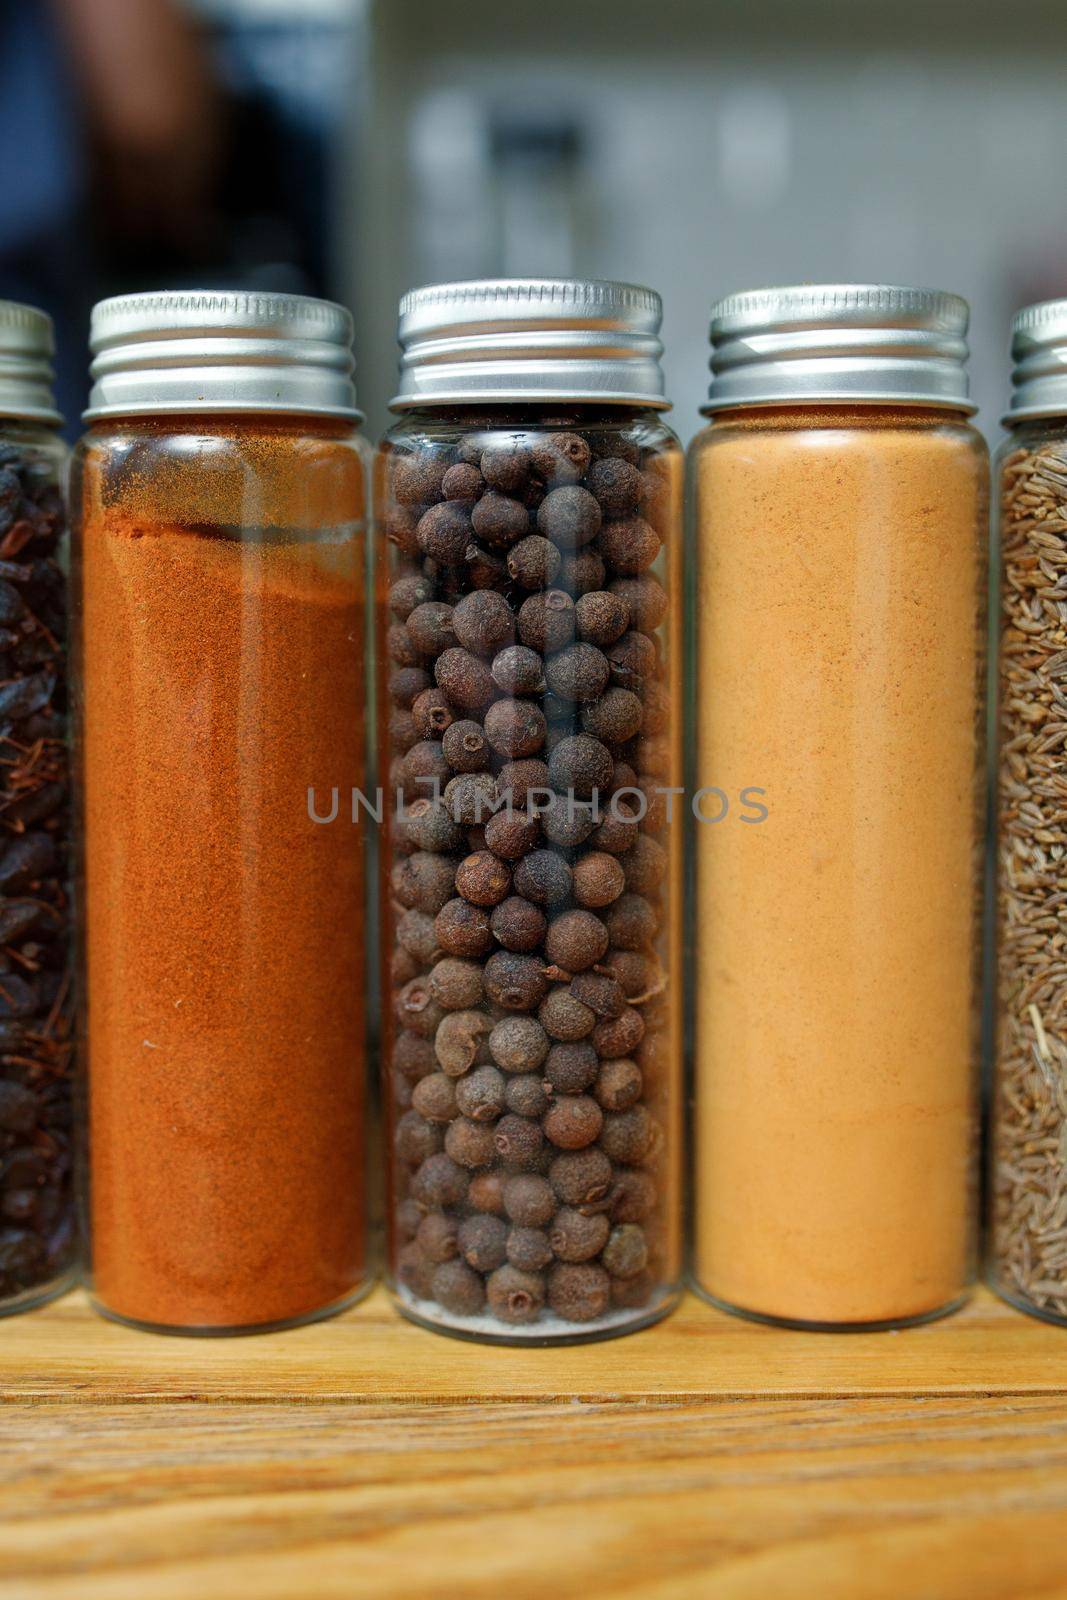 Paprika, sweet peas and ginger in transparent jars among other spices on the table in home kitchen.